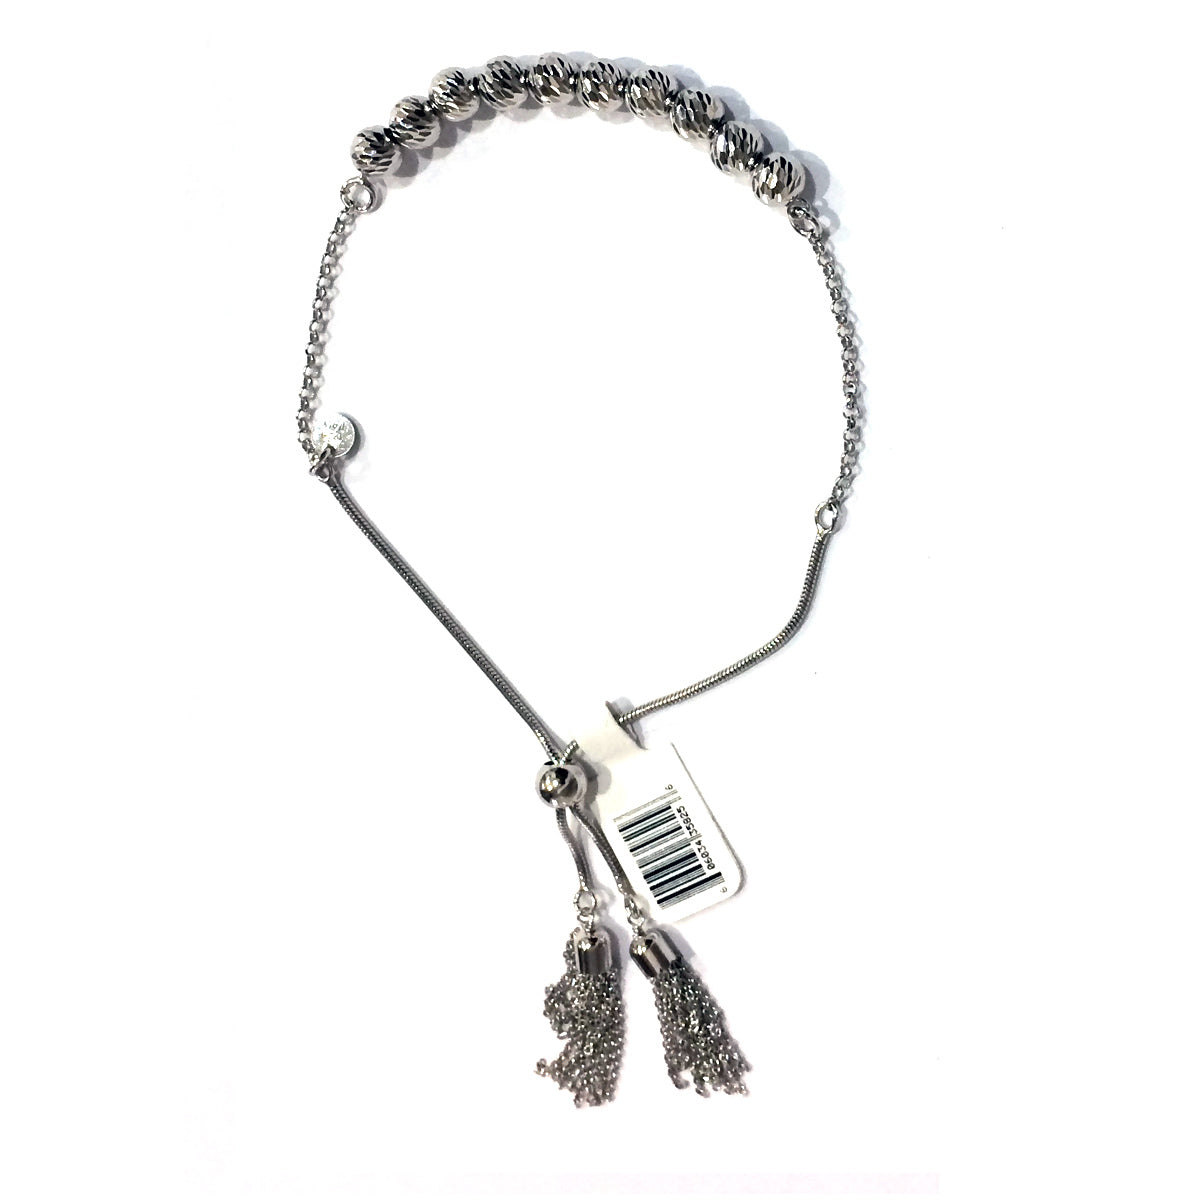 Rebecca Sloane Silver Cable Chain Slide Bracelet with Tassels